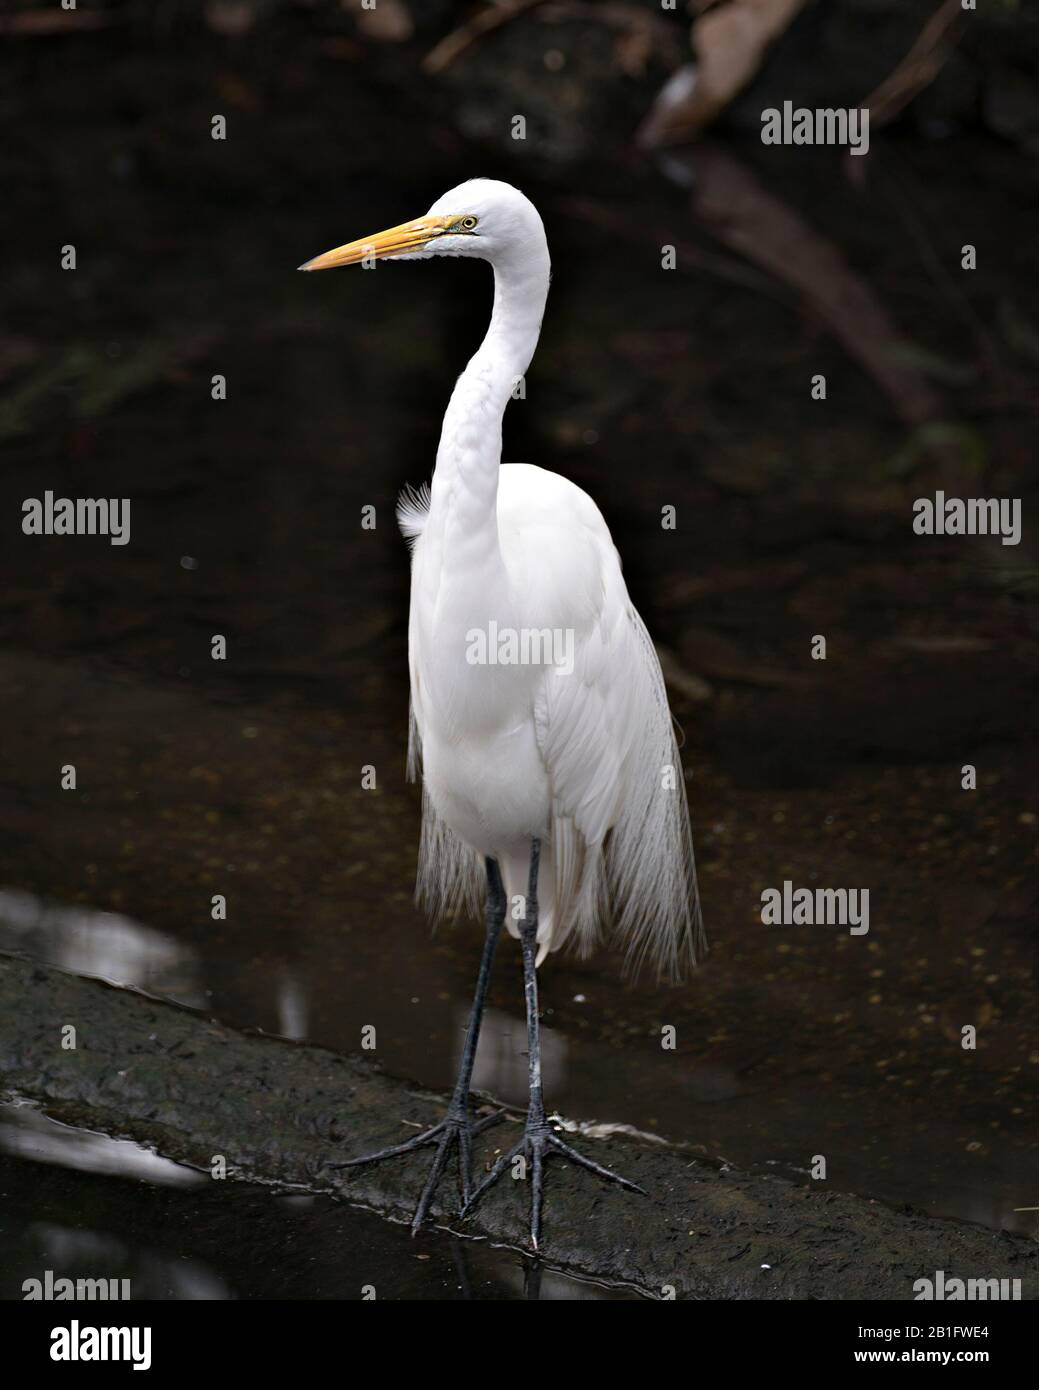 Great White Egret bird close-up profile view standing on a rock with moss with a black background contrast by the water in its environment and surroun Stock Photo